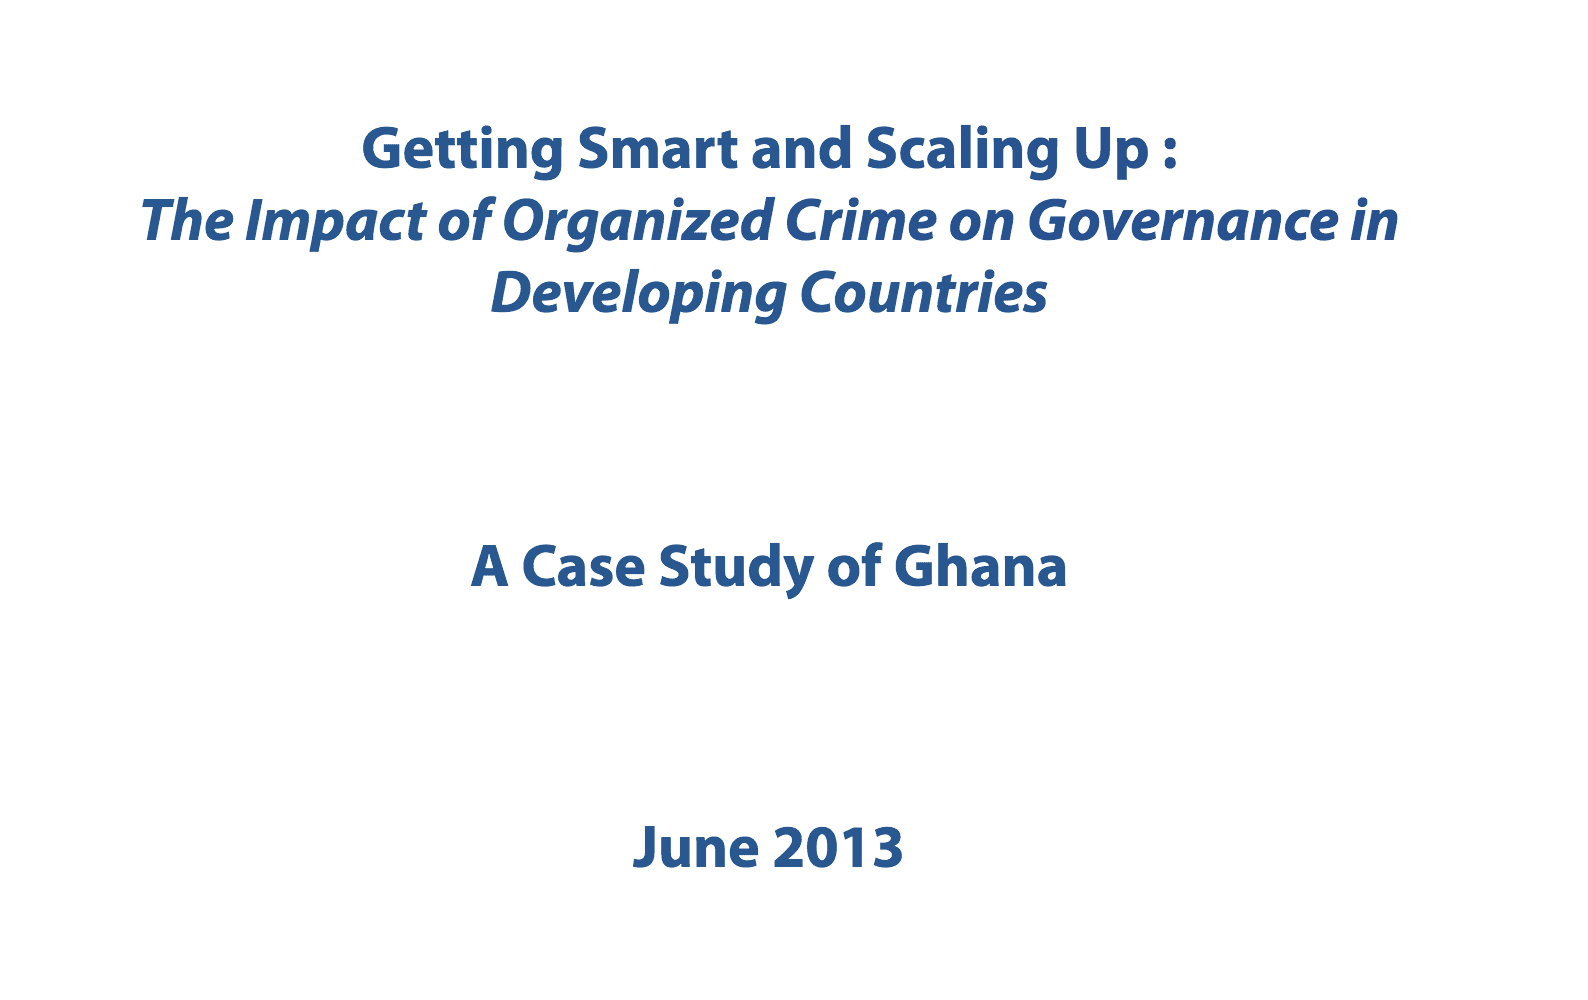 Getting Smart and Scaling Up: The Impact of Organized Crime on Governance in Developing Countries (A Case Study of Ghana)